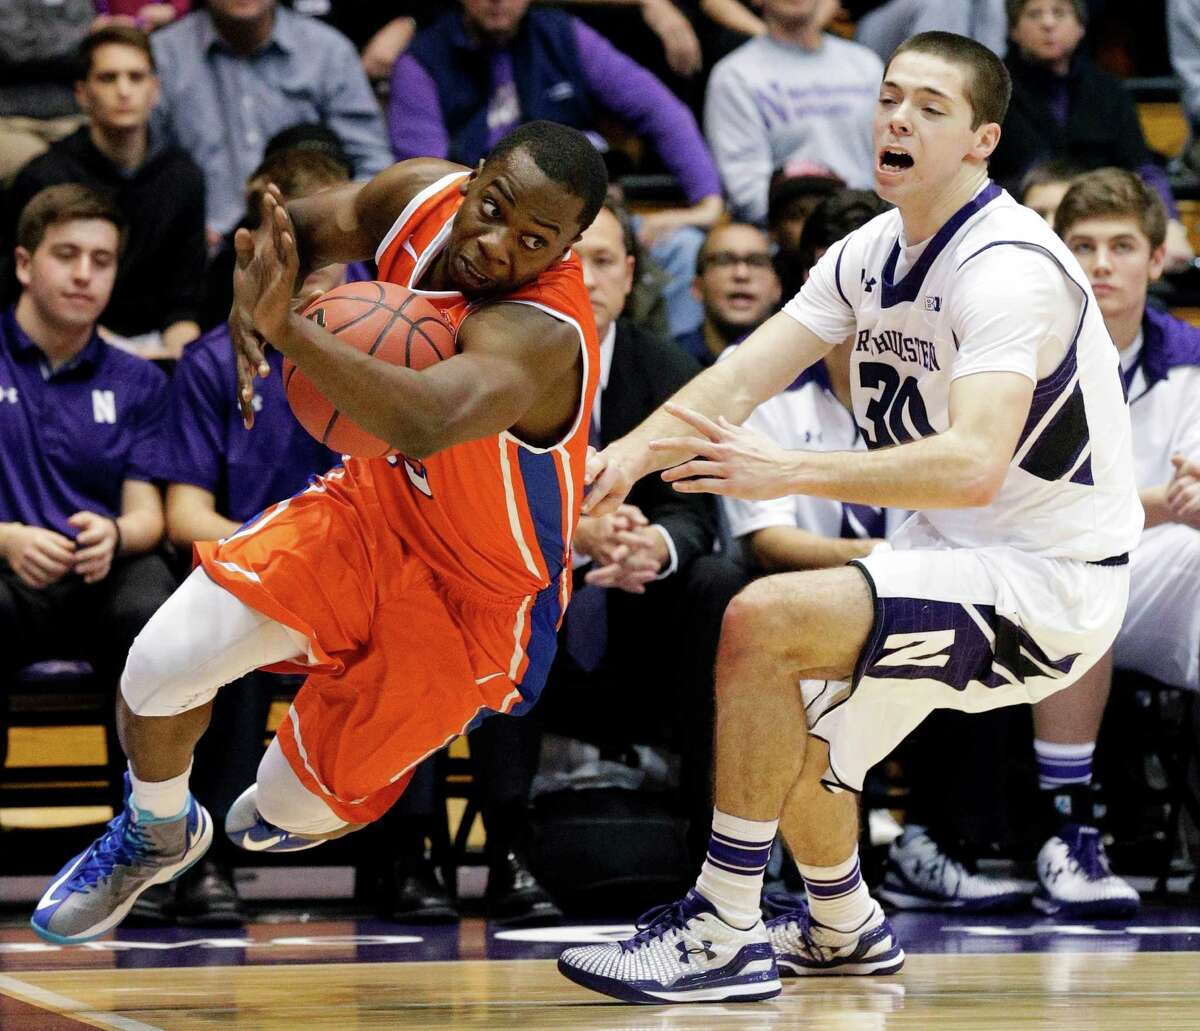 Houston Baptist guard Anthony Odunsi, left, tries to maneuver past Northwestern forward Bryant Mclintosh during the first half of Friday's game.